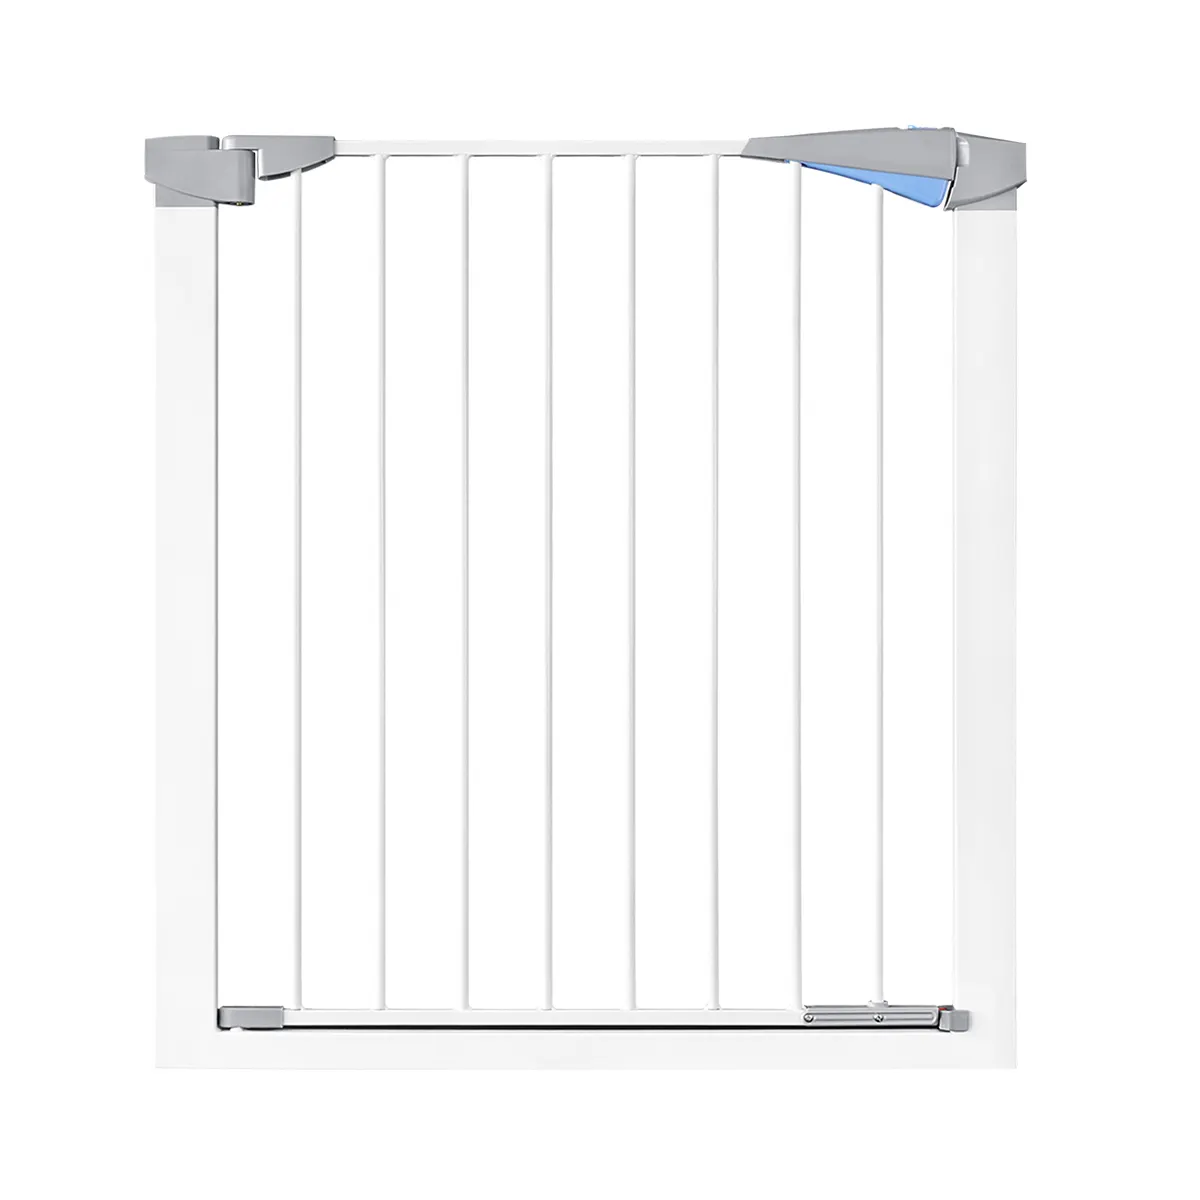 Stainless steel metal baby safety gate,baby gate safety,safety gate for baby or pet